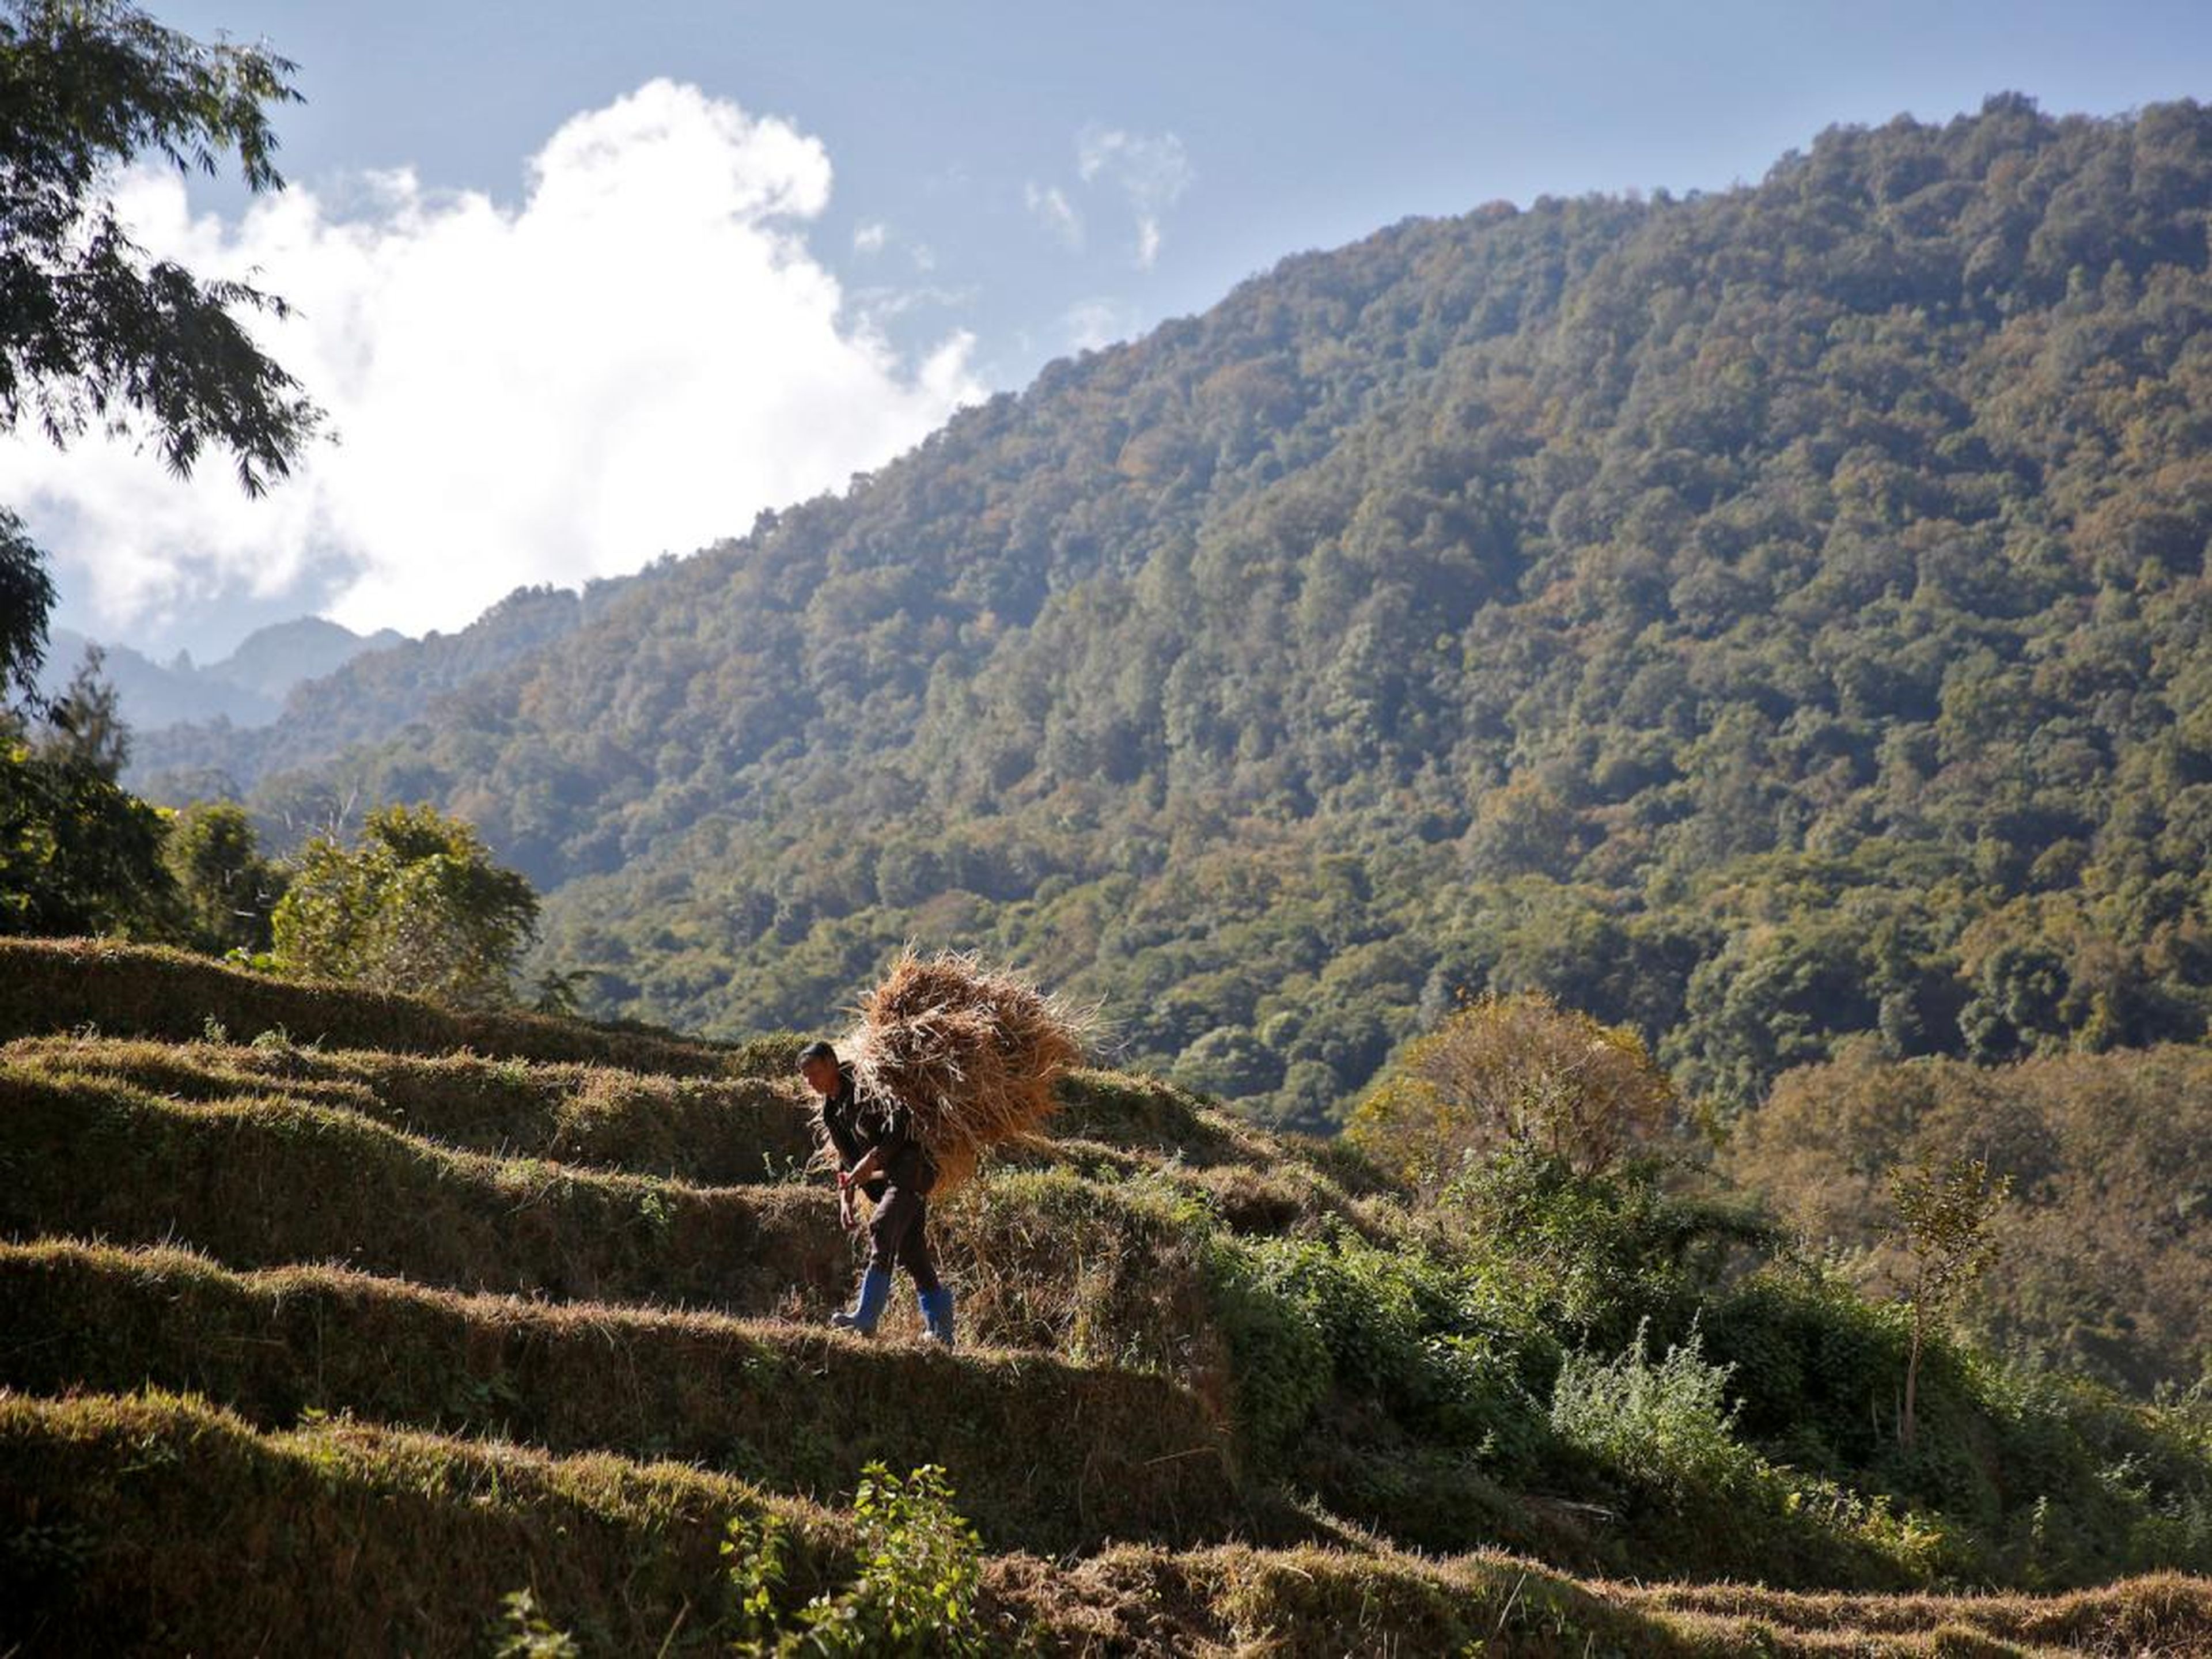 It's a big change for Bhutan, whose $2.2 billion economy is largely agricultural.